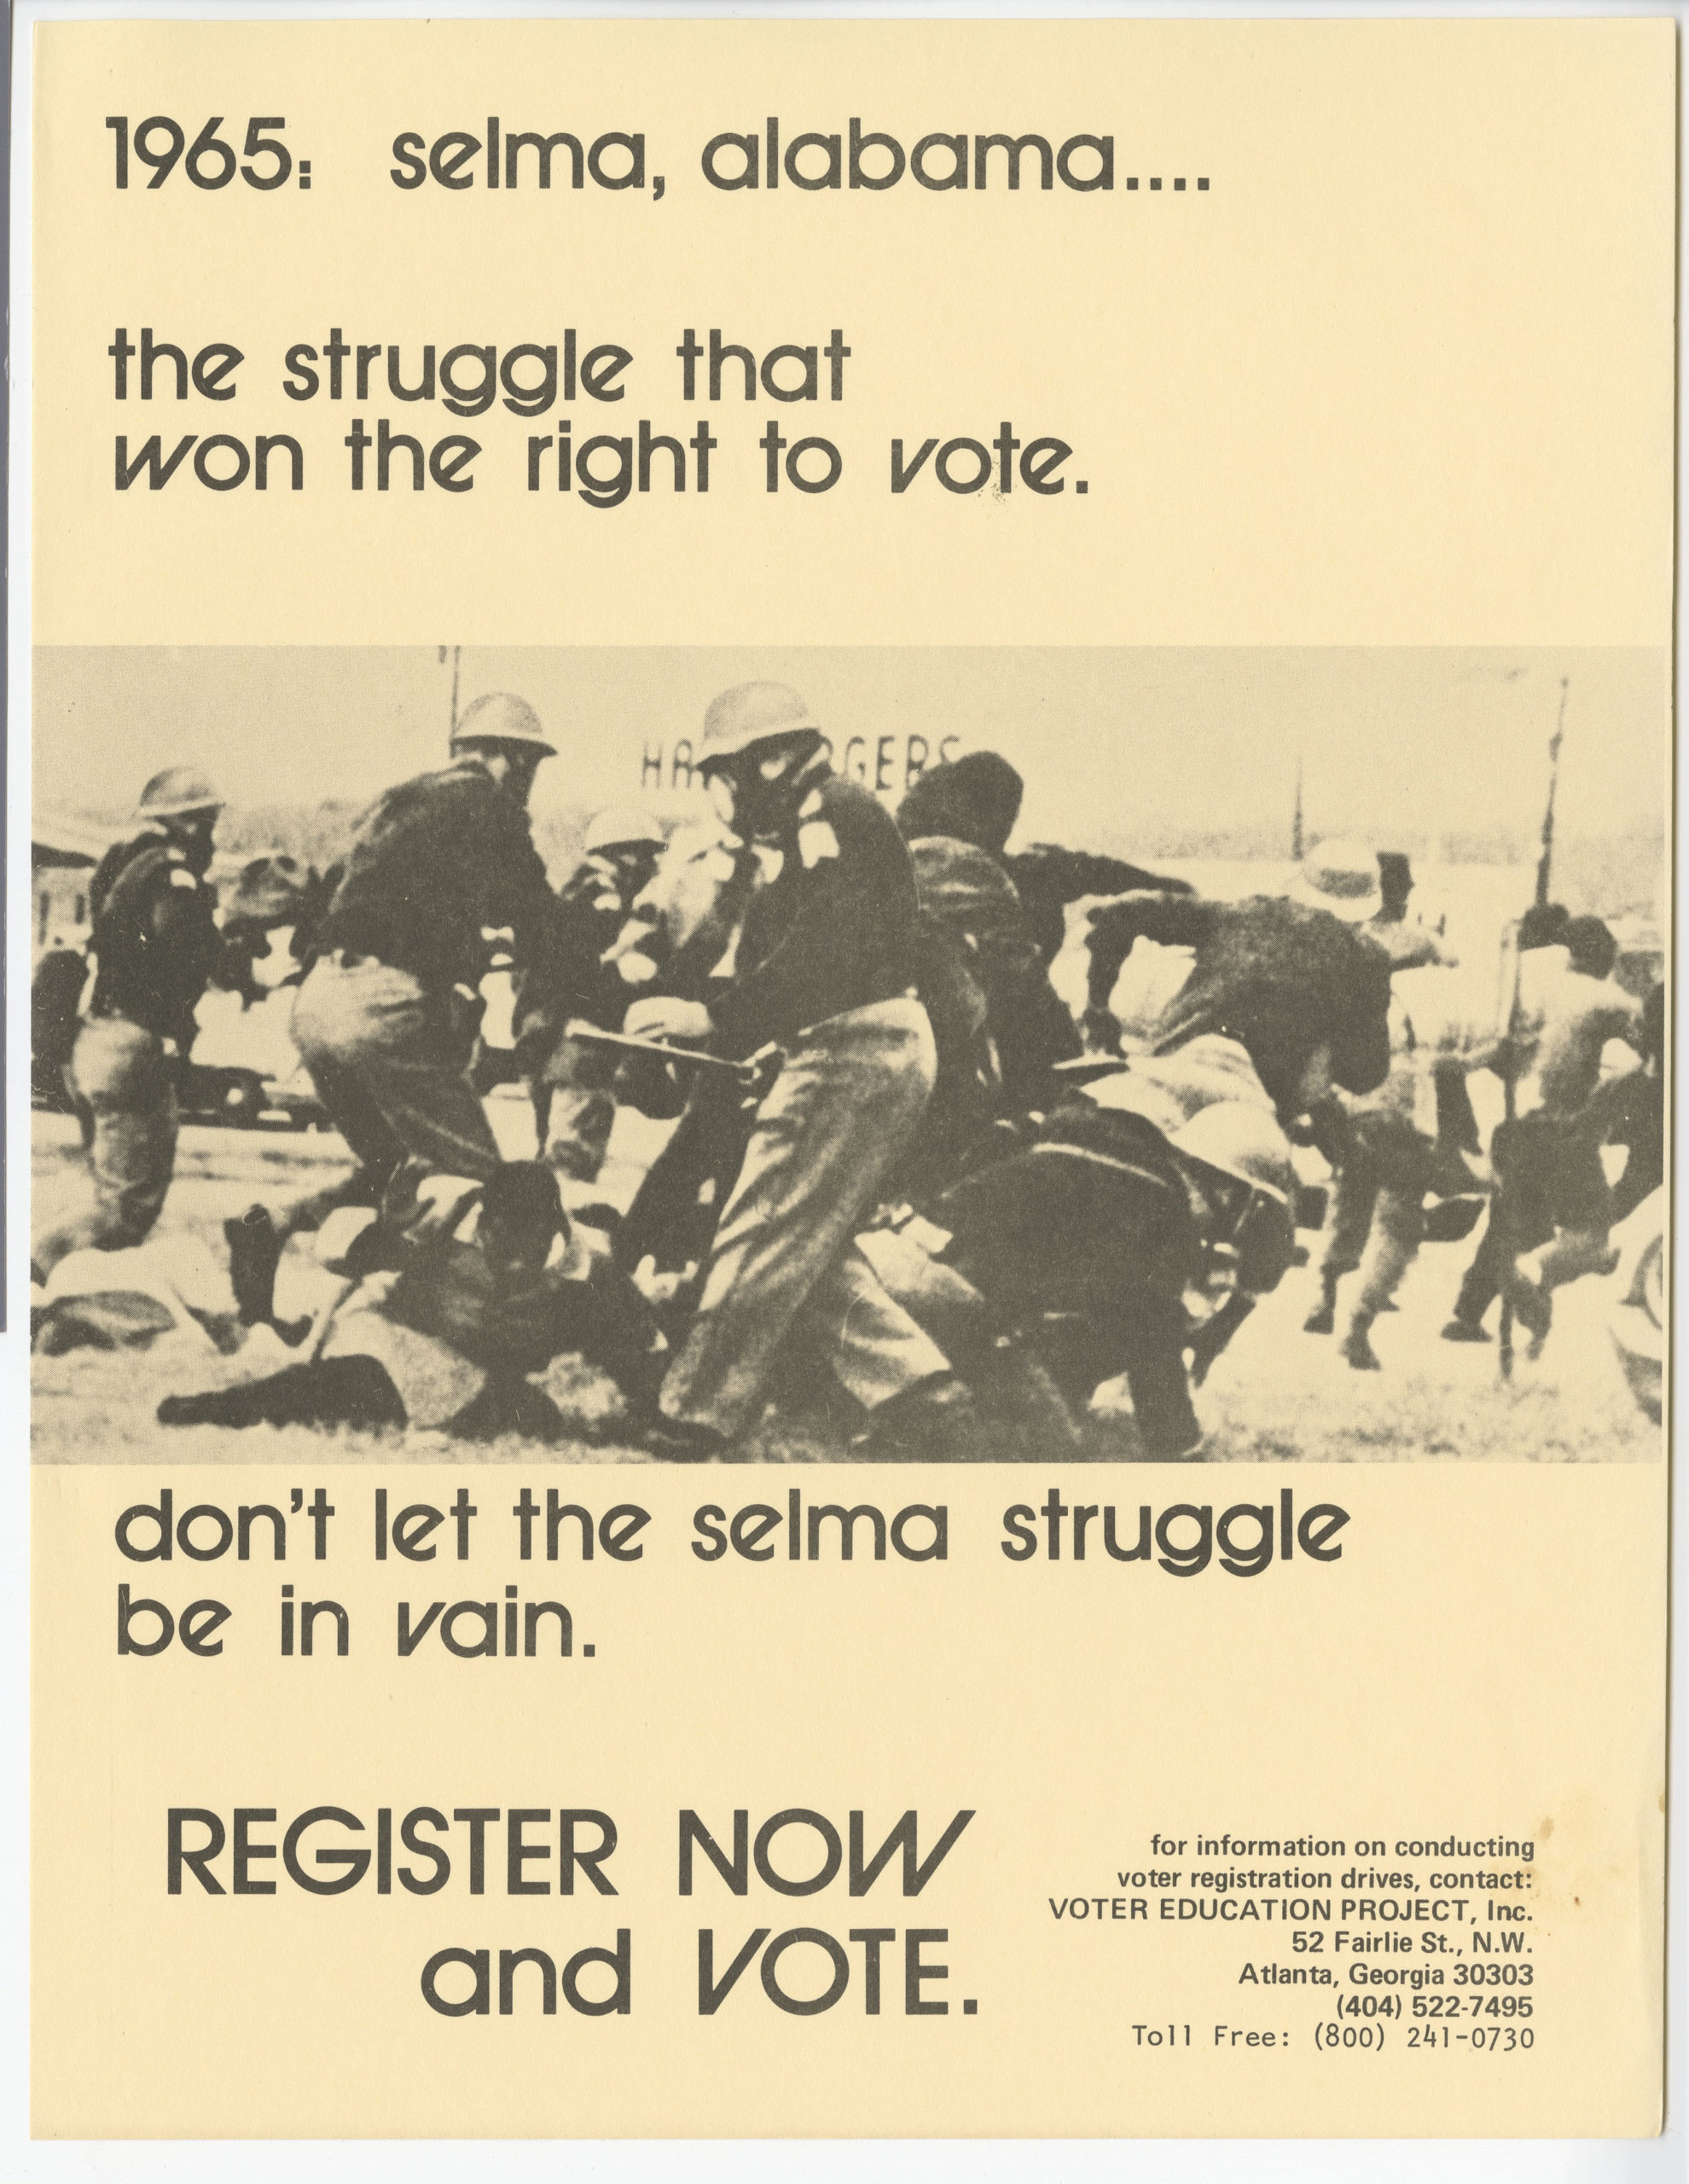 Selma Poster, Voter Education Project (Southern Regional Council)circa 1960 Voter Education Project organizational records